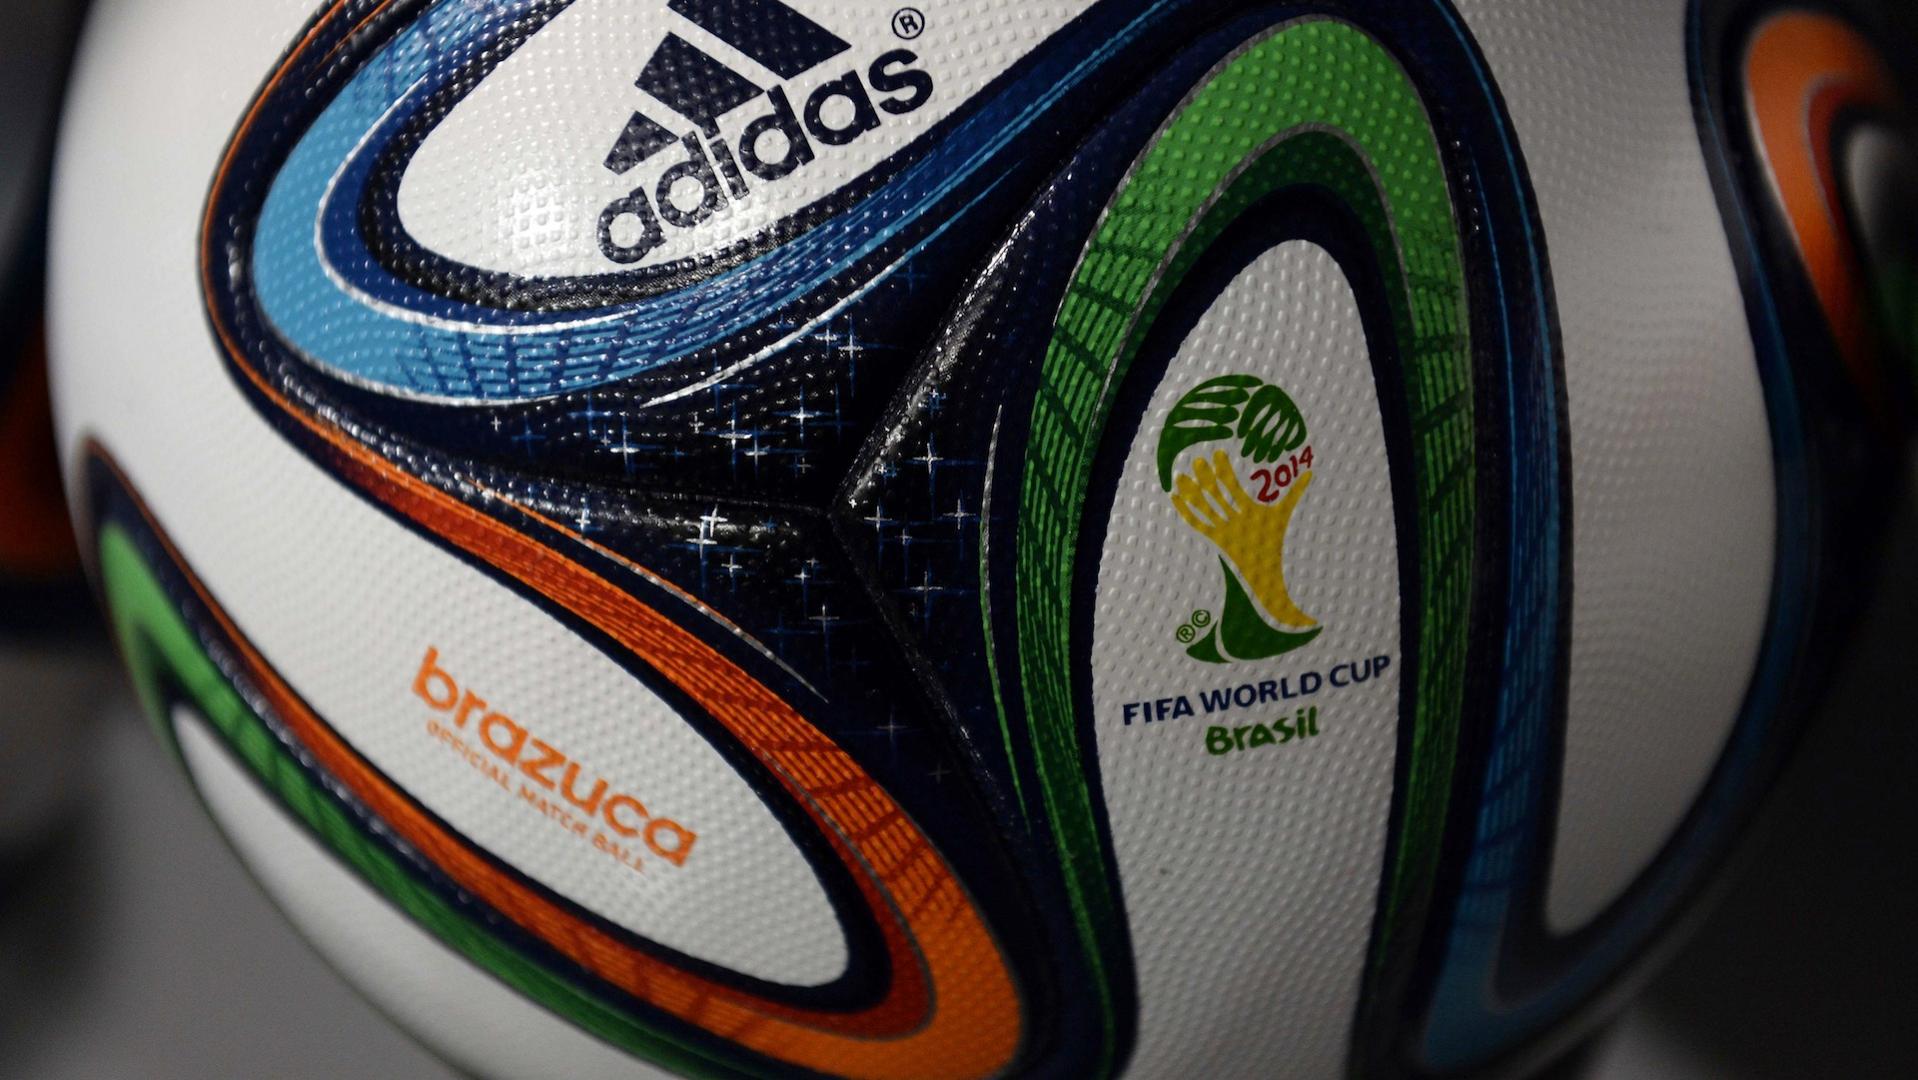 2014 world cup, Brazuca: The physics of Adidas' new World Cup ball.